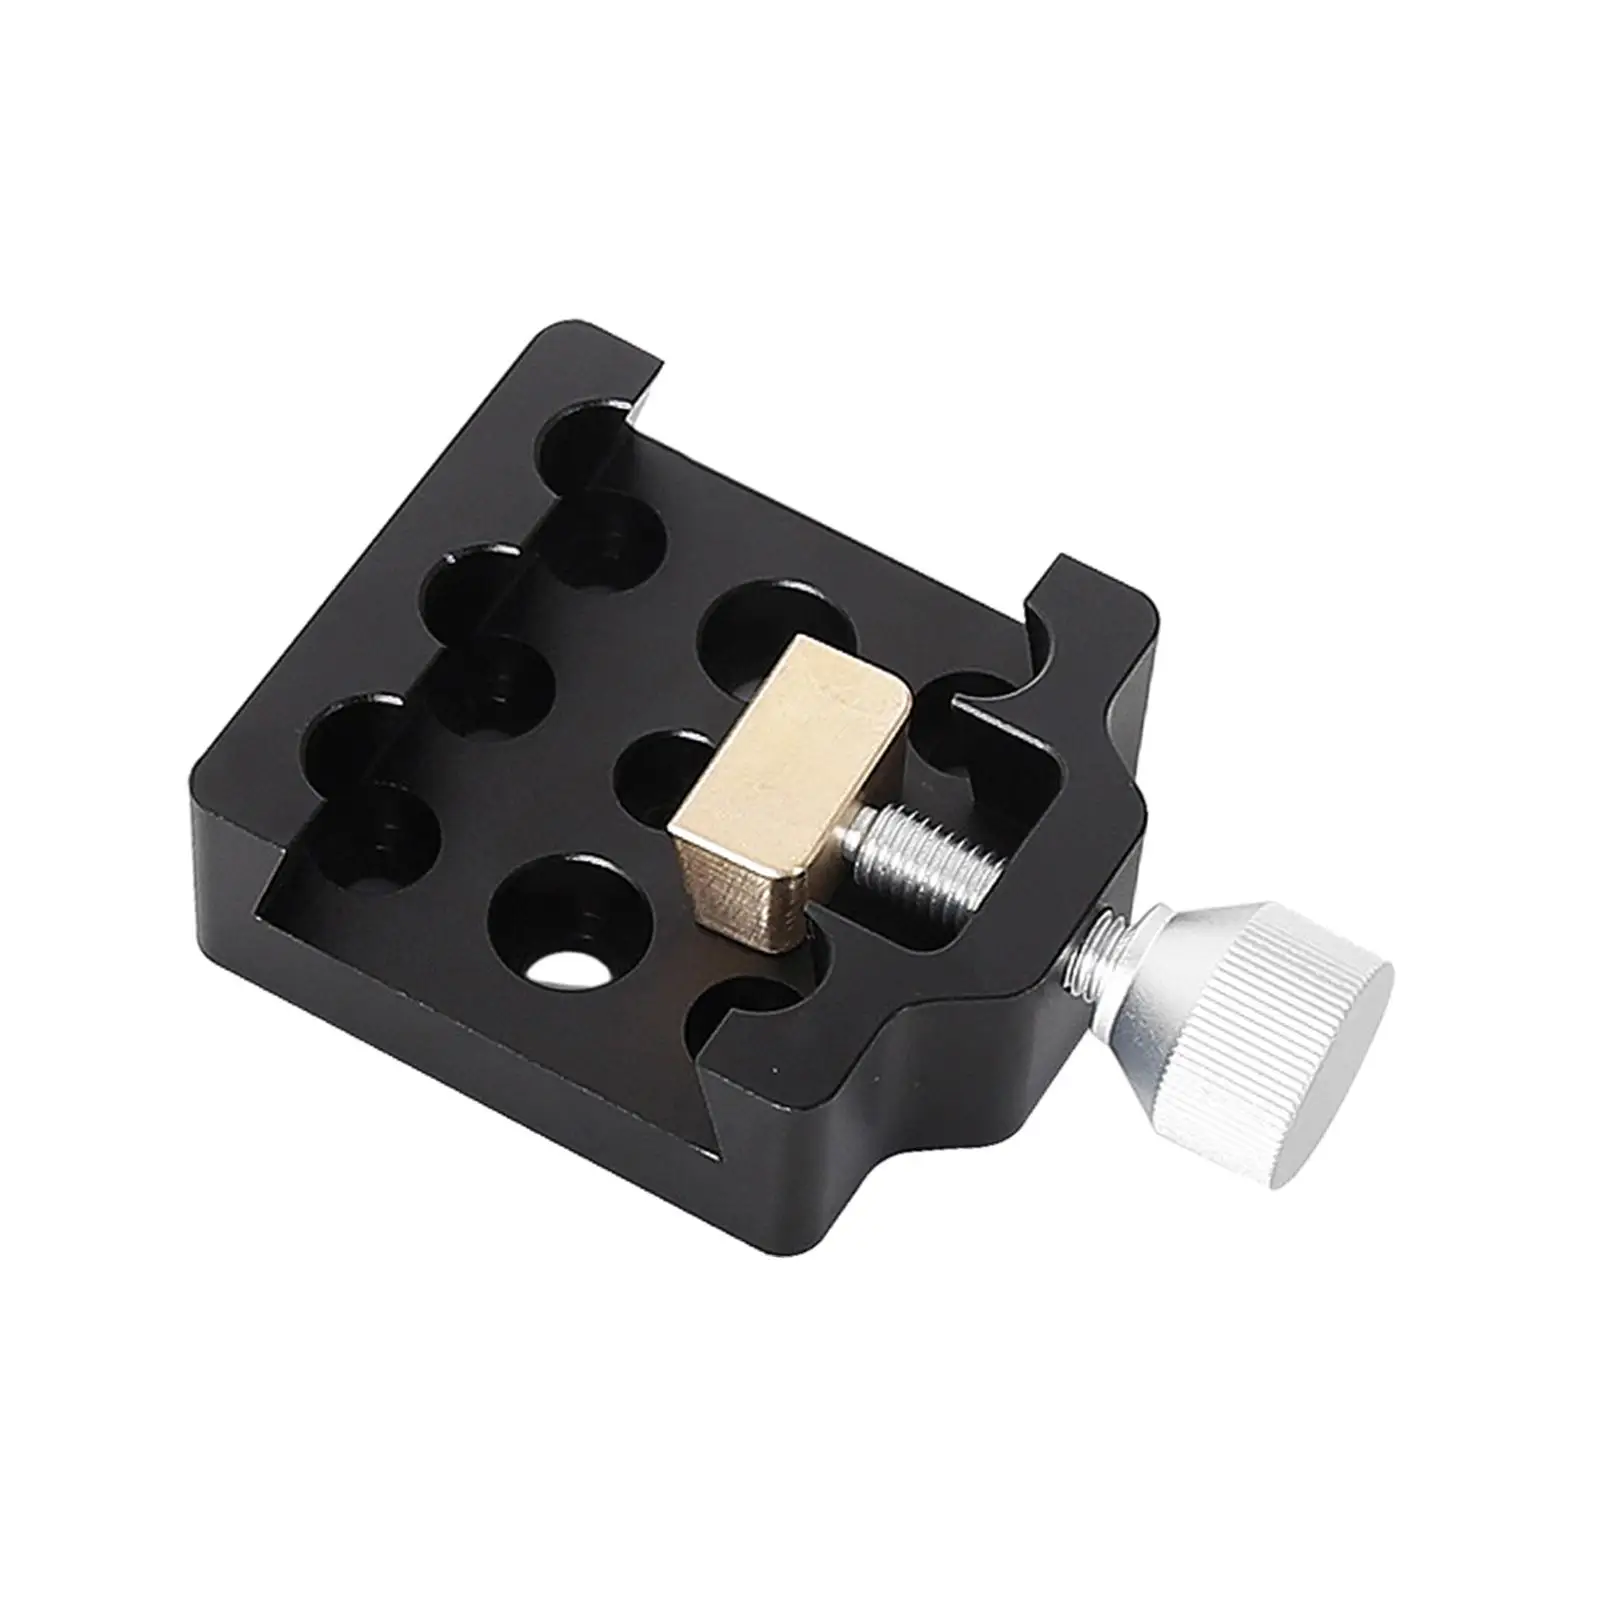 Telescope Adapter Mount Base Saddle Clamp Professional for Equatorial Head